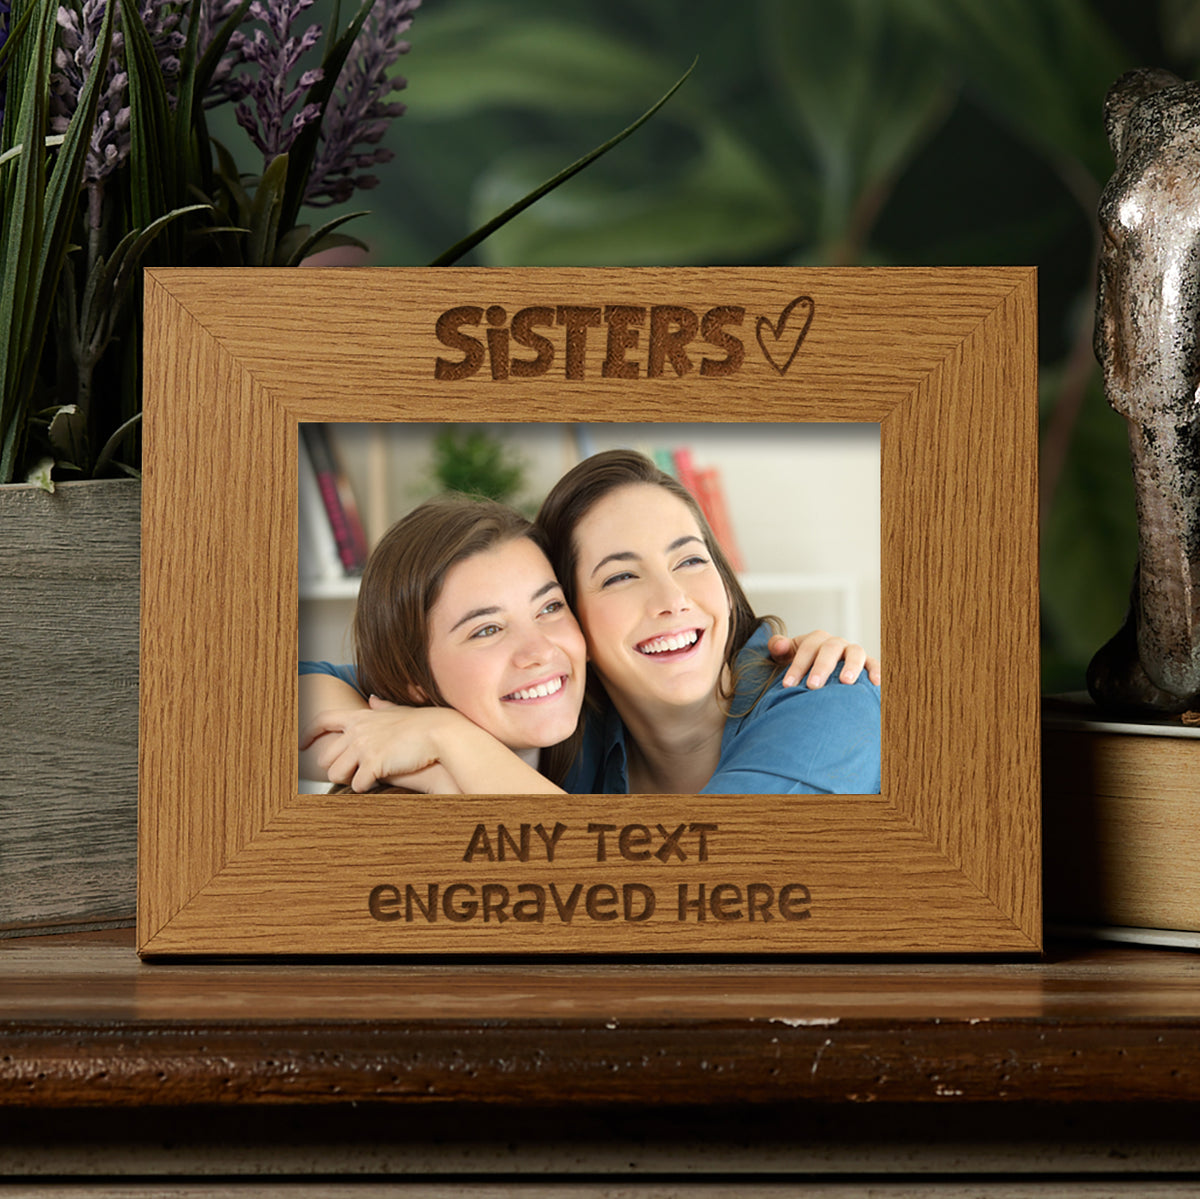 Personalised Sisters Picture Photo Frame Heart Gift